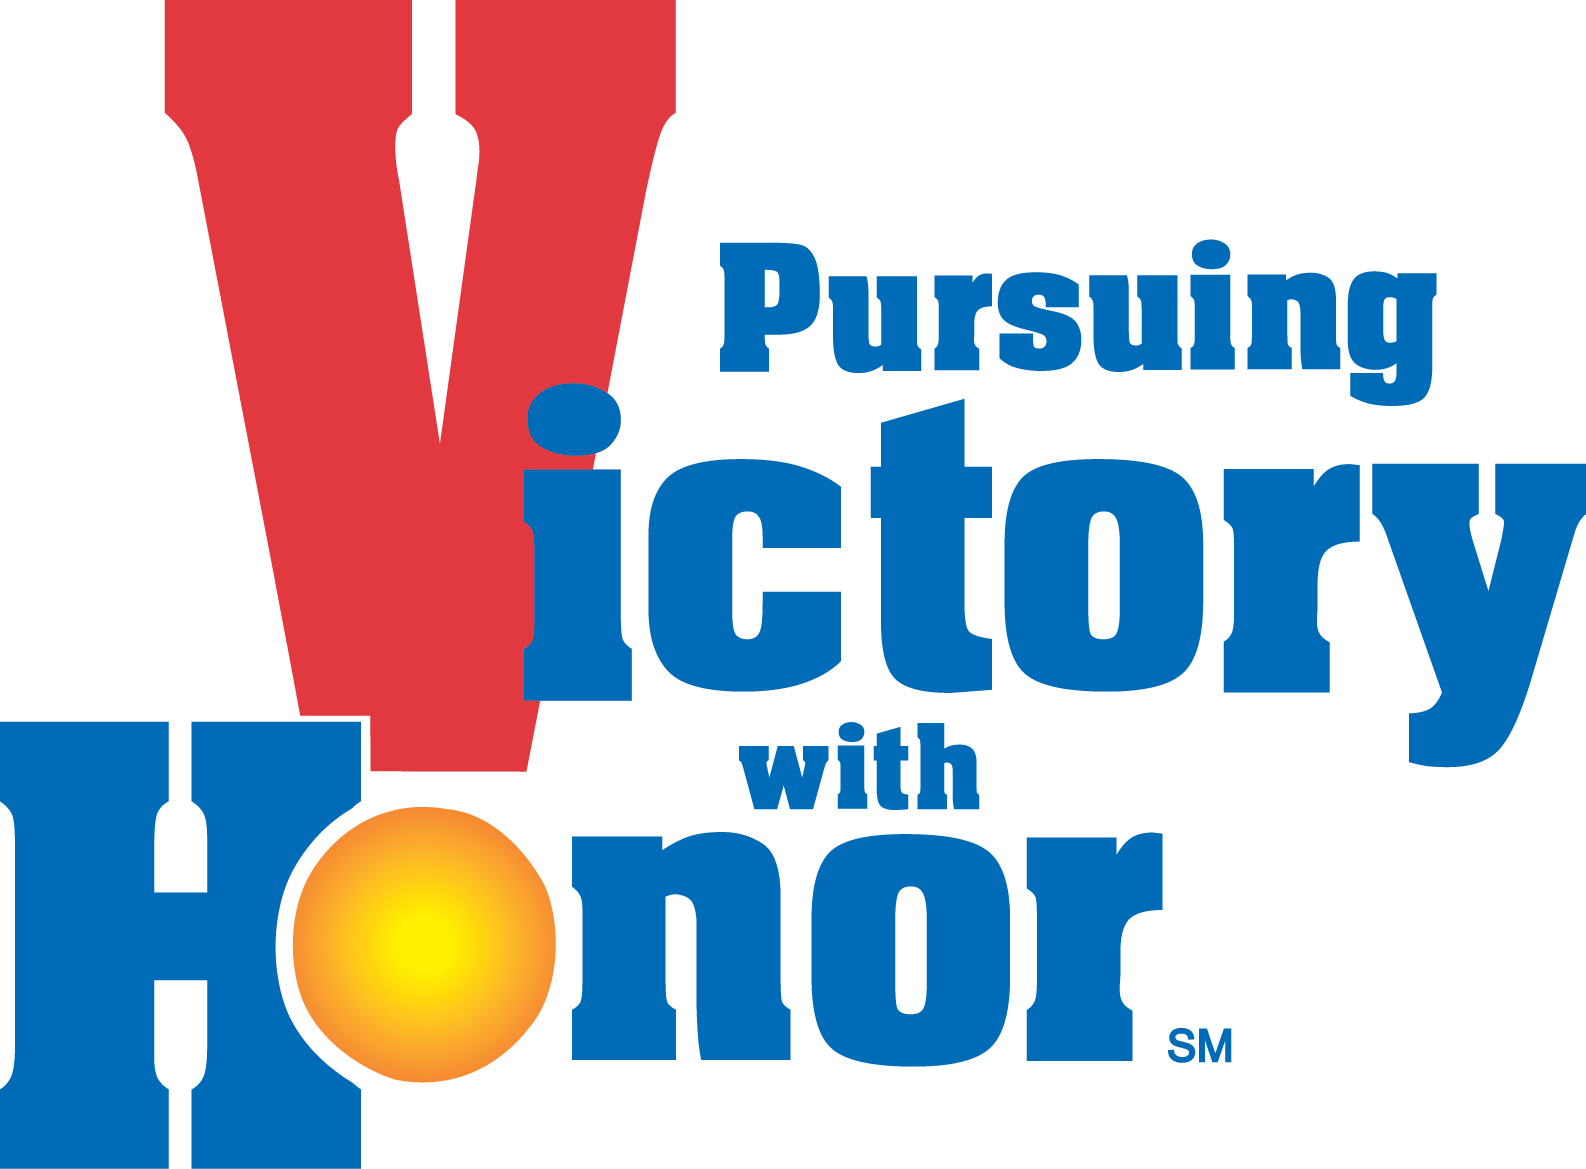 Pursuing Victory With Honor logo